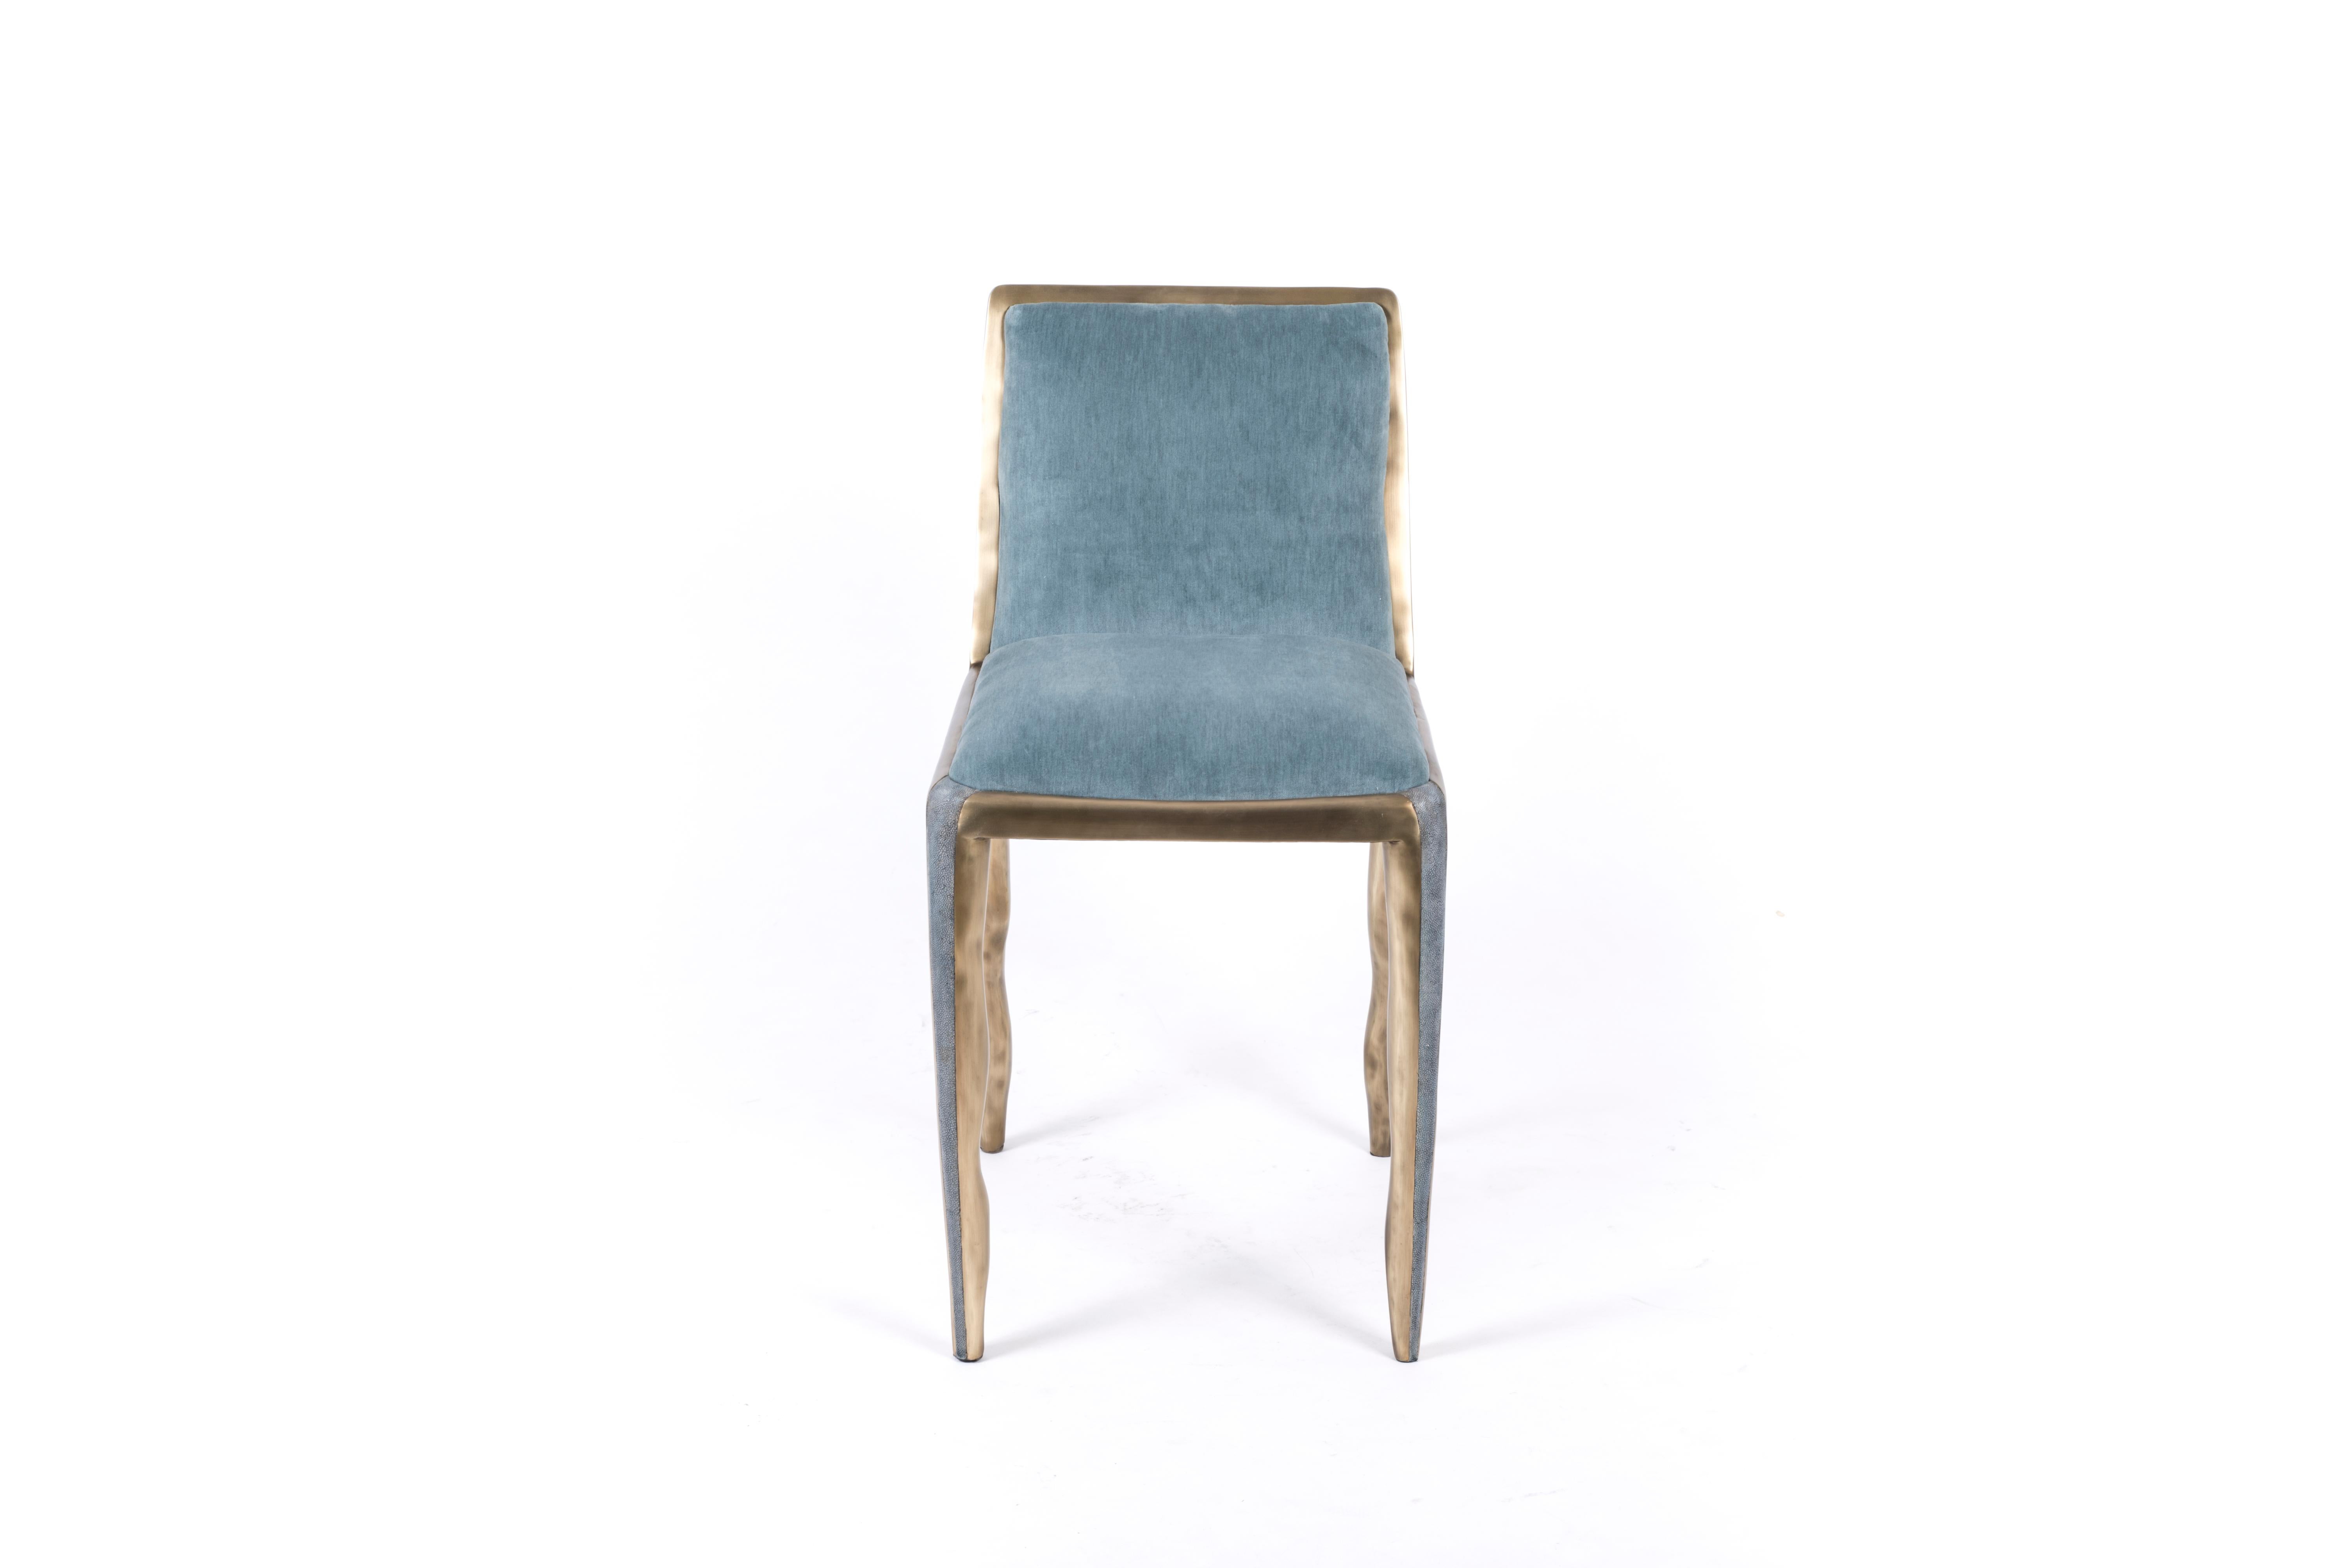 The melting chair in blue shagreen and bronze patina brass is a beautiful piece to accompany a dining table or desk. The piece has incredible detail and inlay work with the shagreen running down the center of the legs, surrounded by the irregular